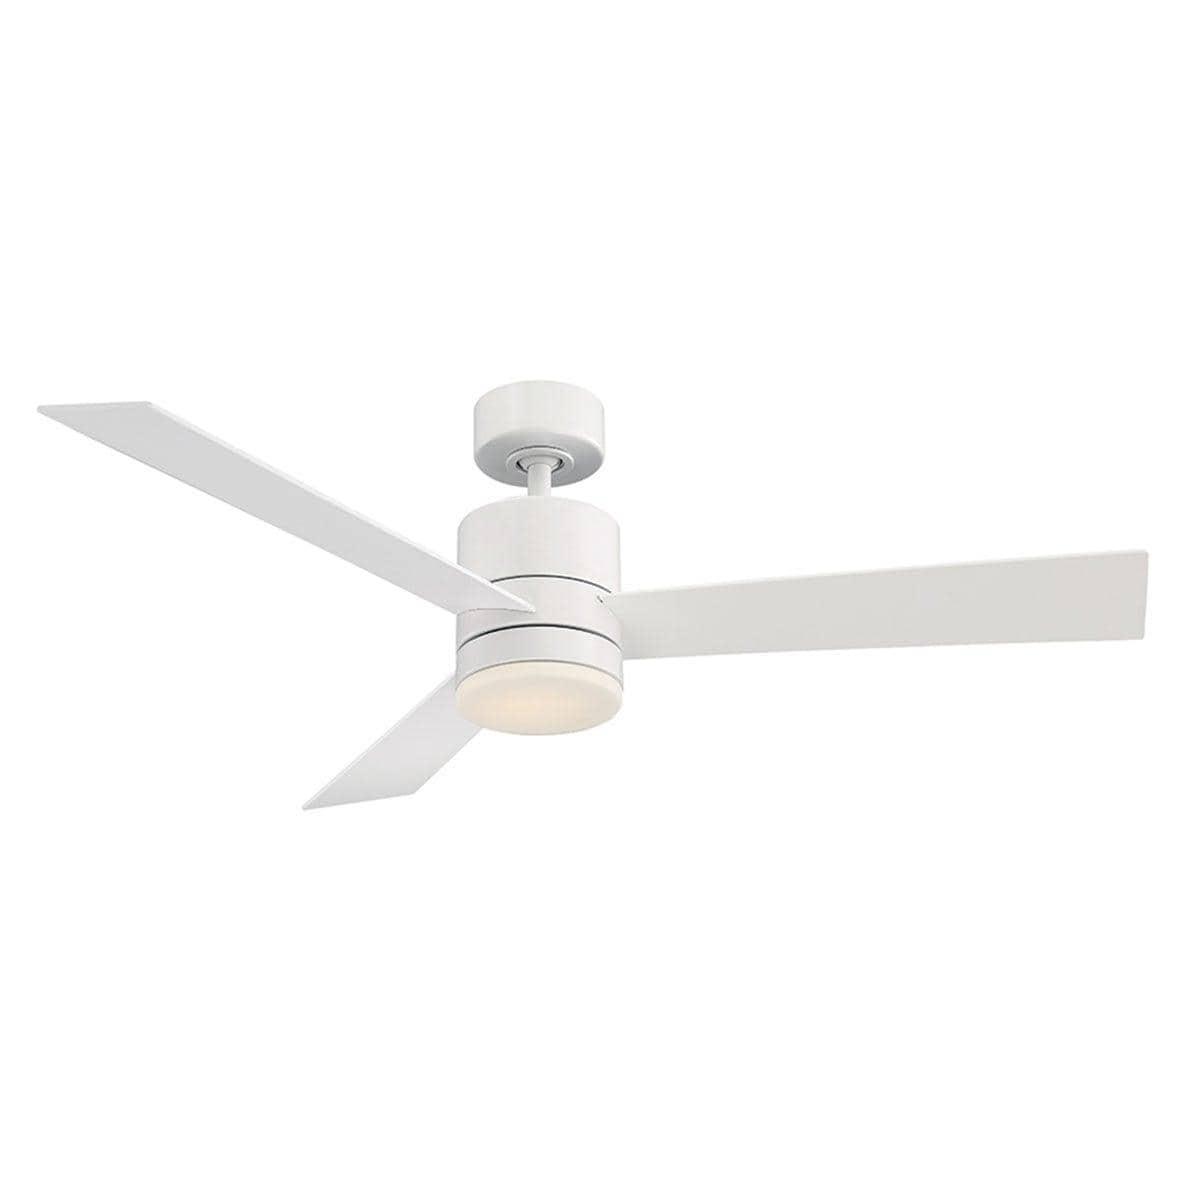 Modern Forms - Axis Ceiling Fan - FR-W1803-52L-MW | Montreal Lighting & Hardware